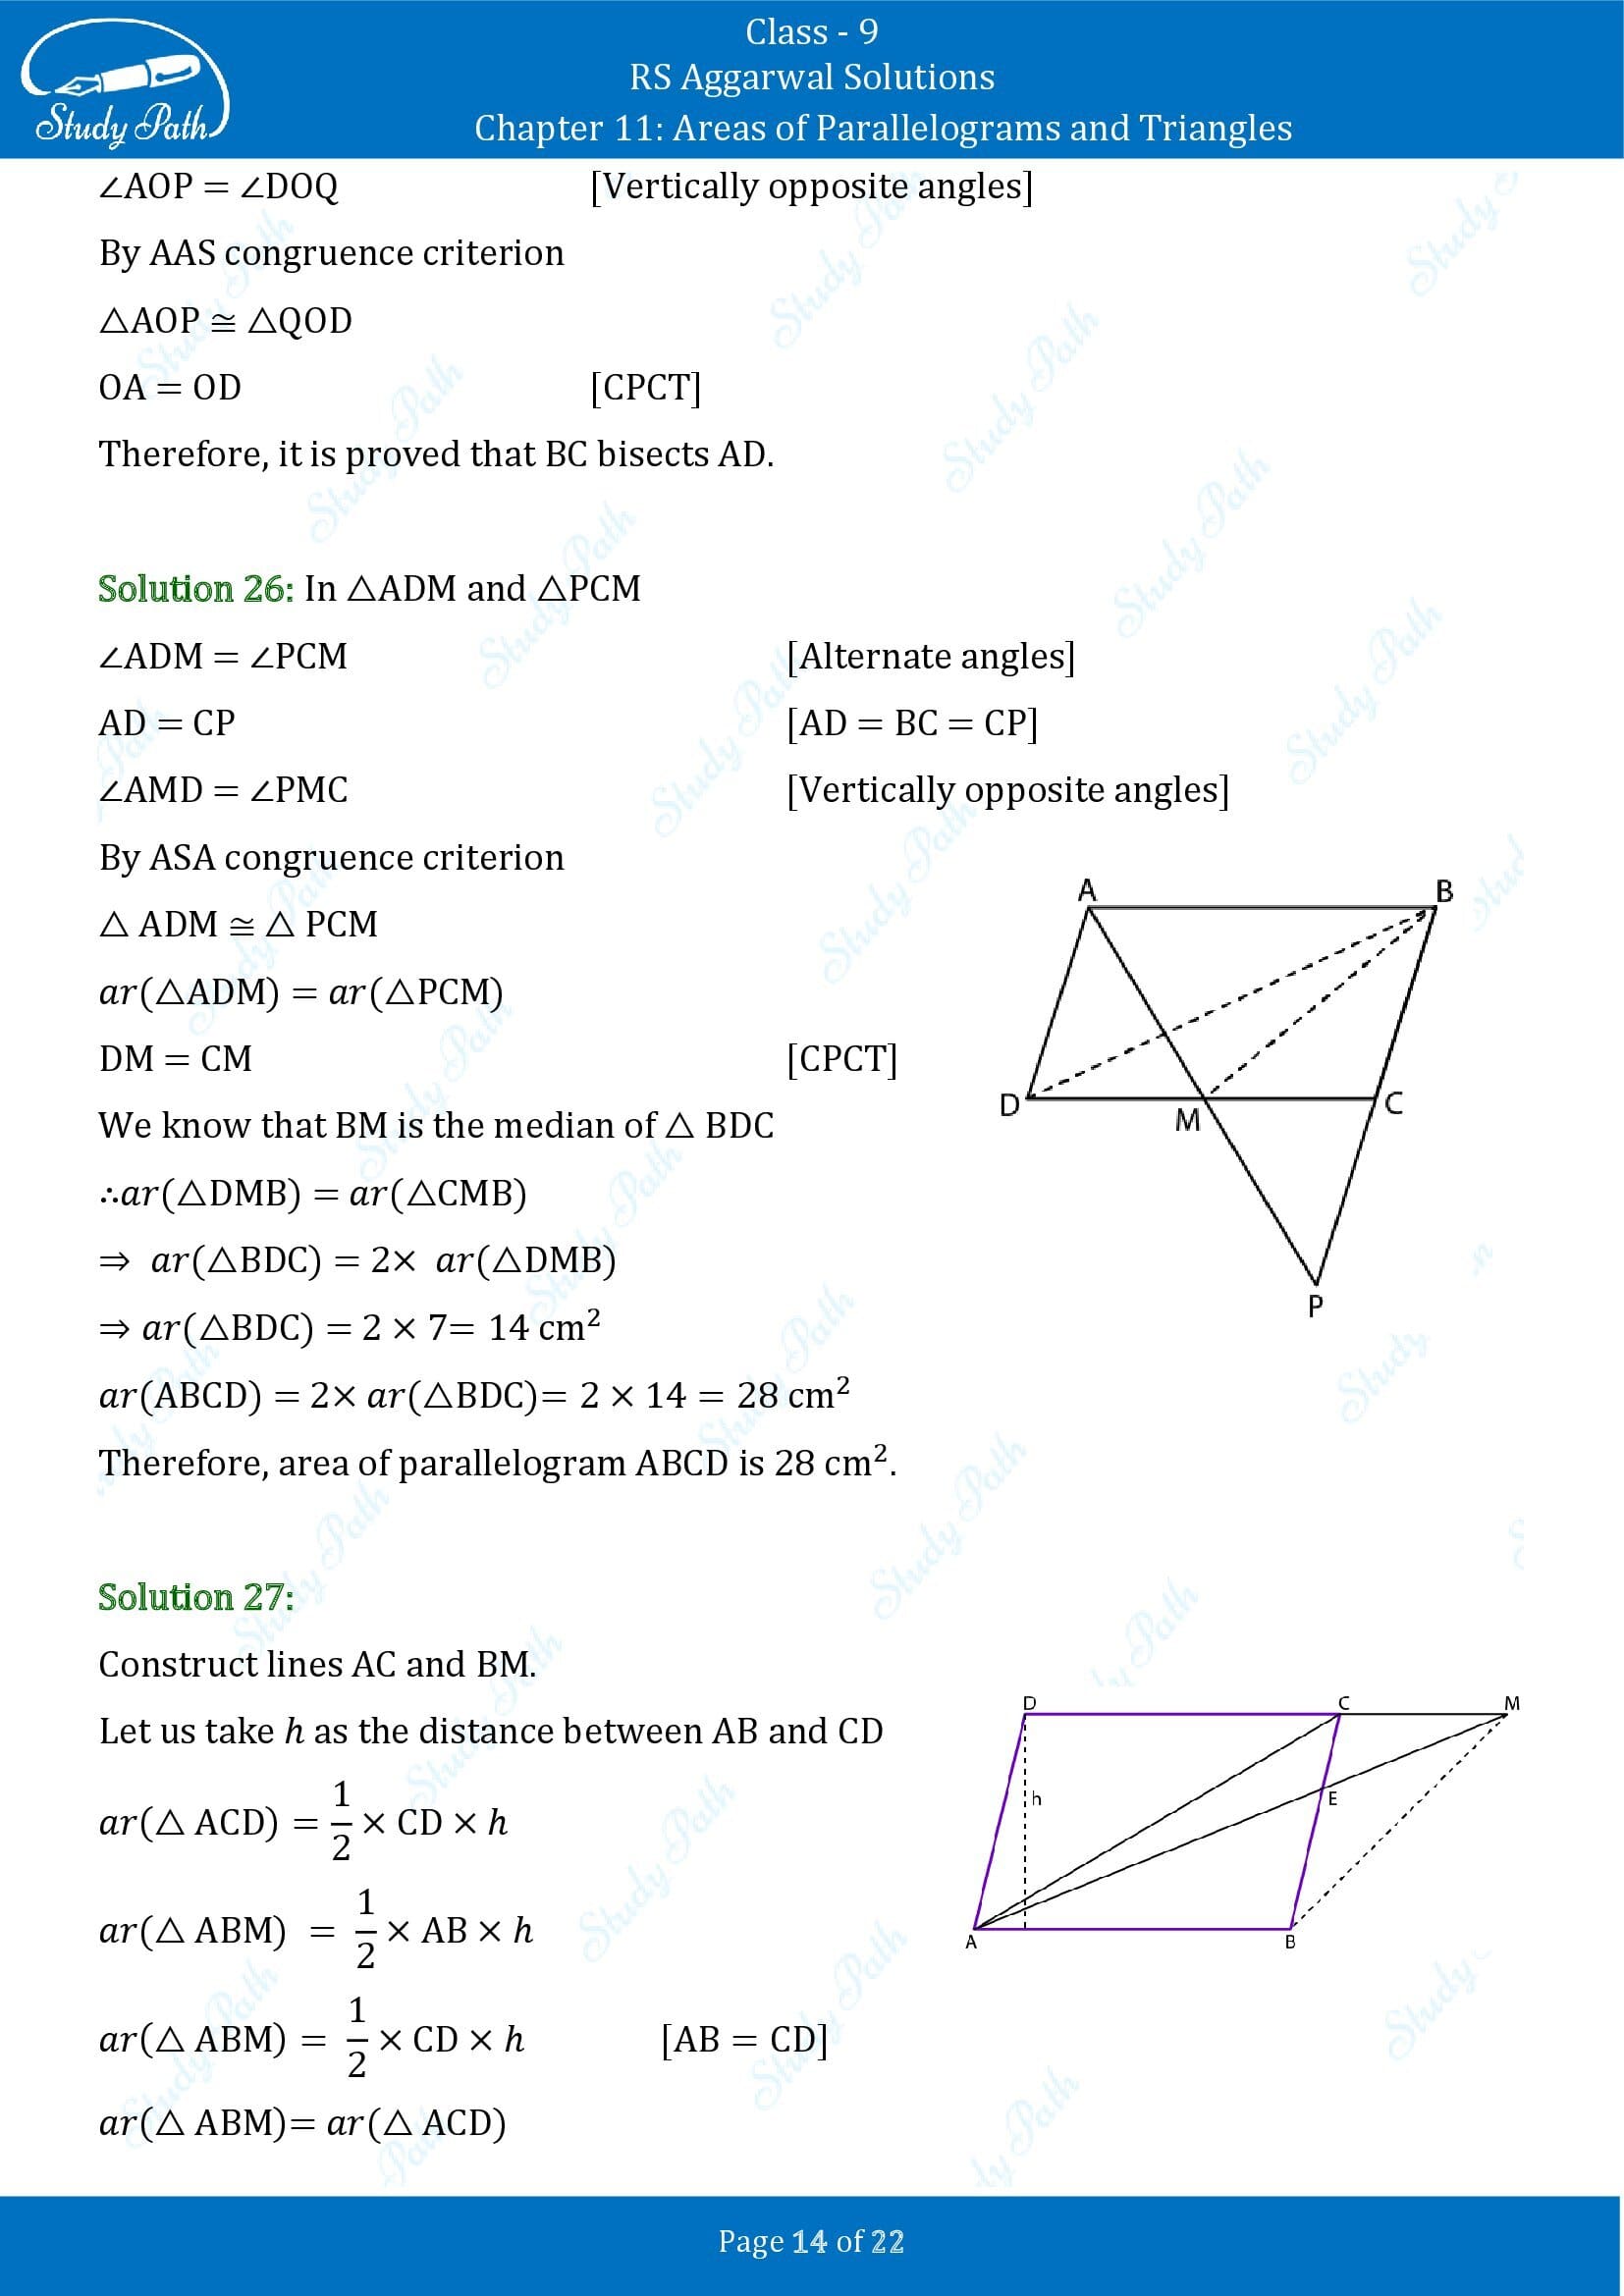 RS Aggarwal Solutions Class 9 Chapter 11 Areas of Parallelograms and Triangles Exercise 11 00014